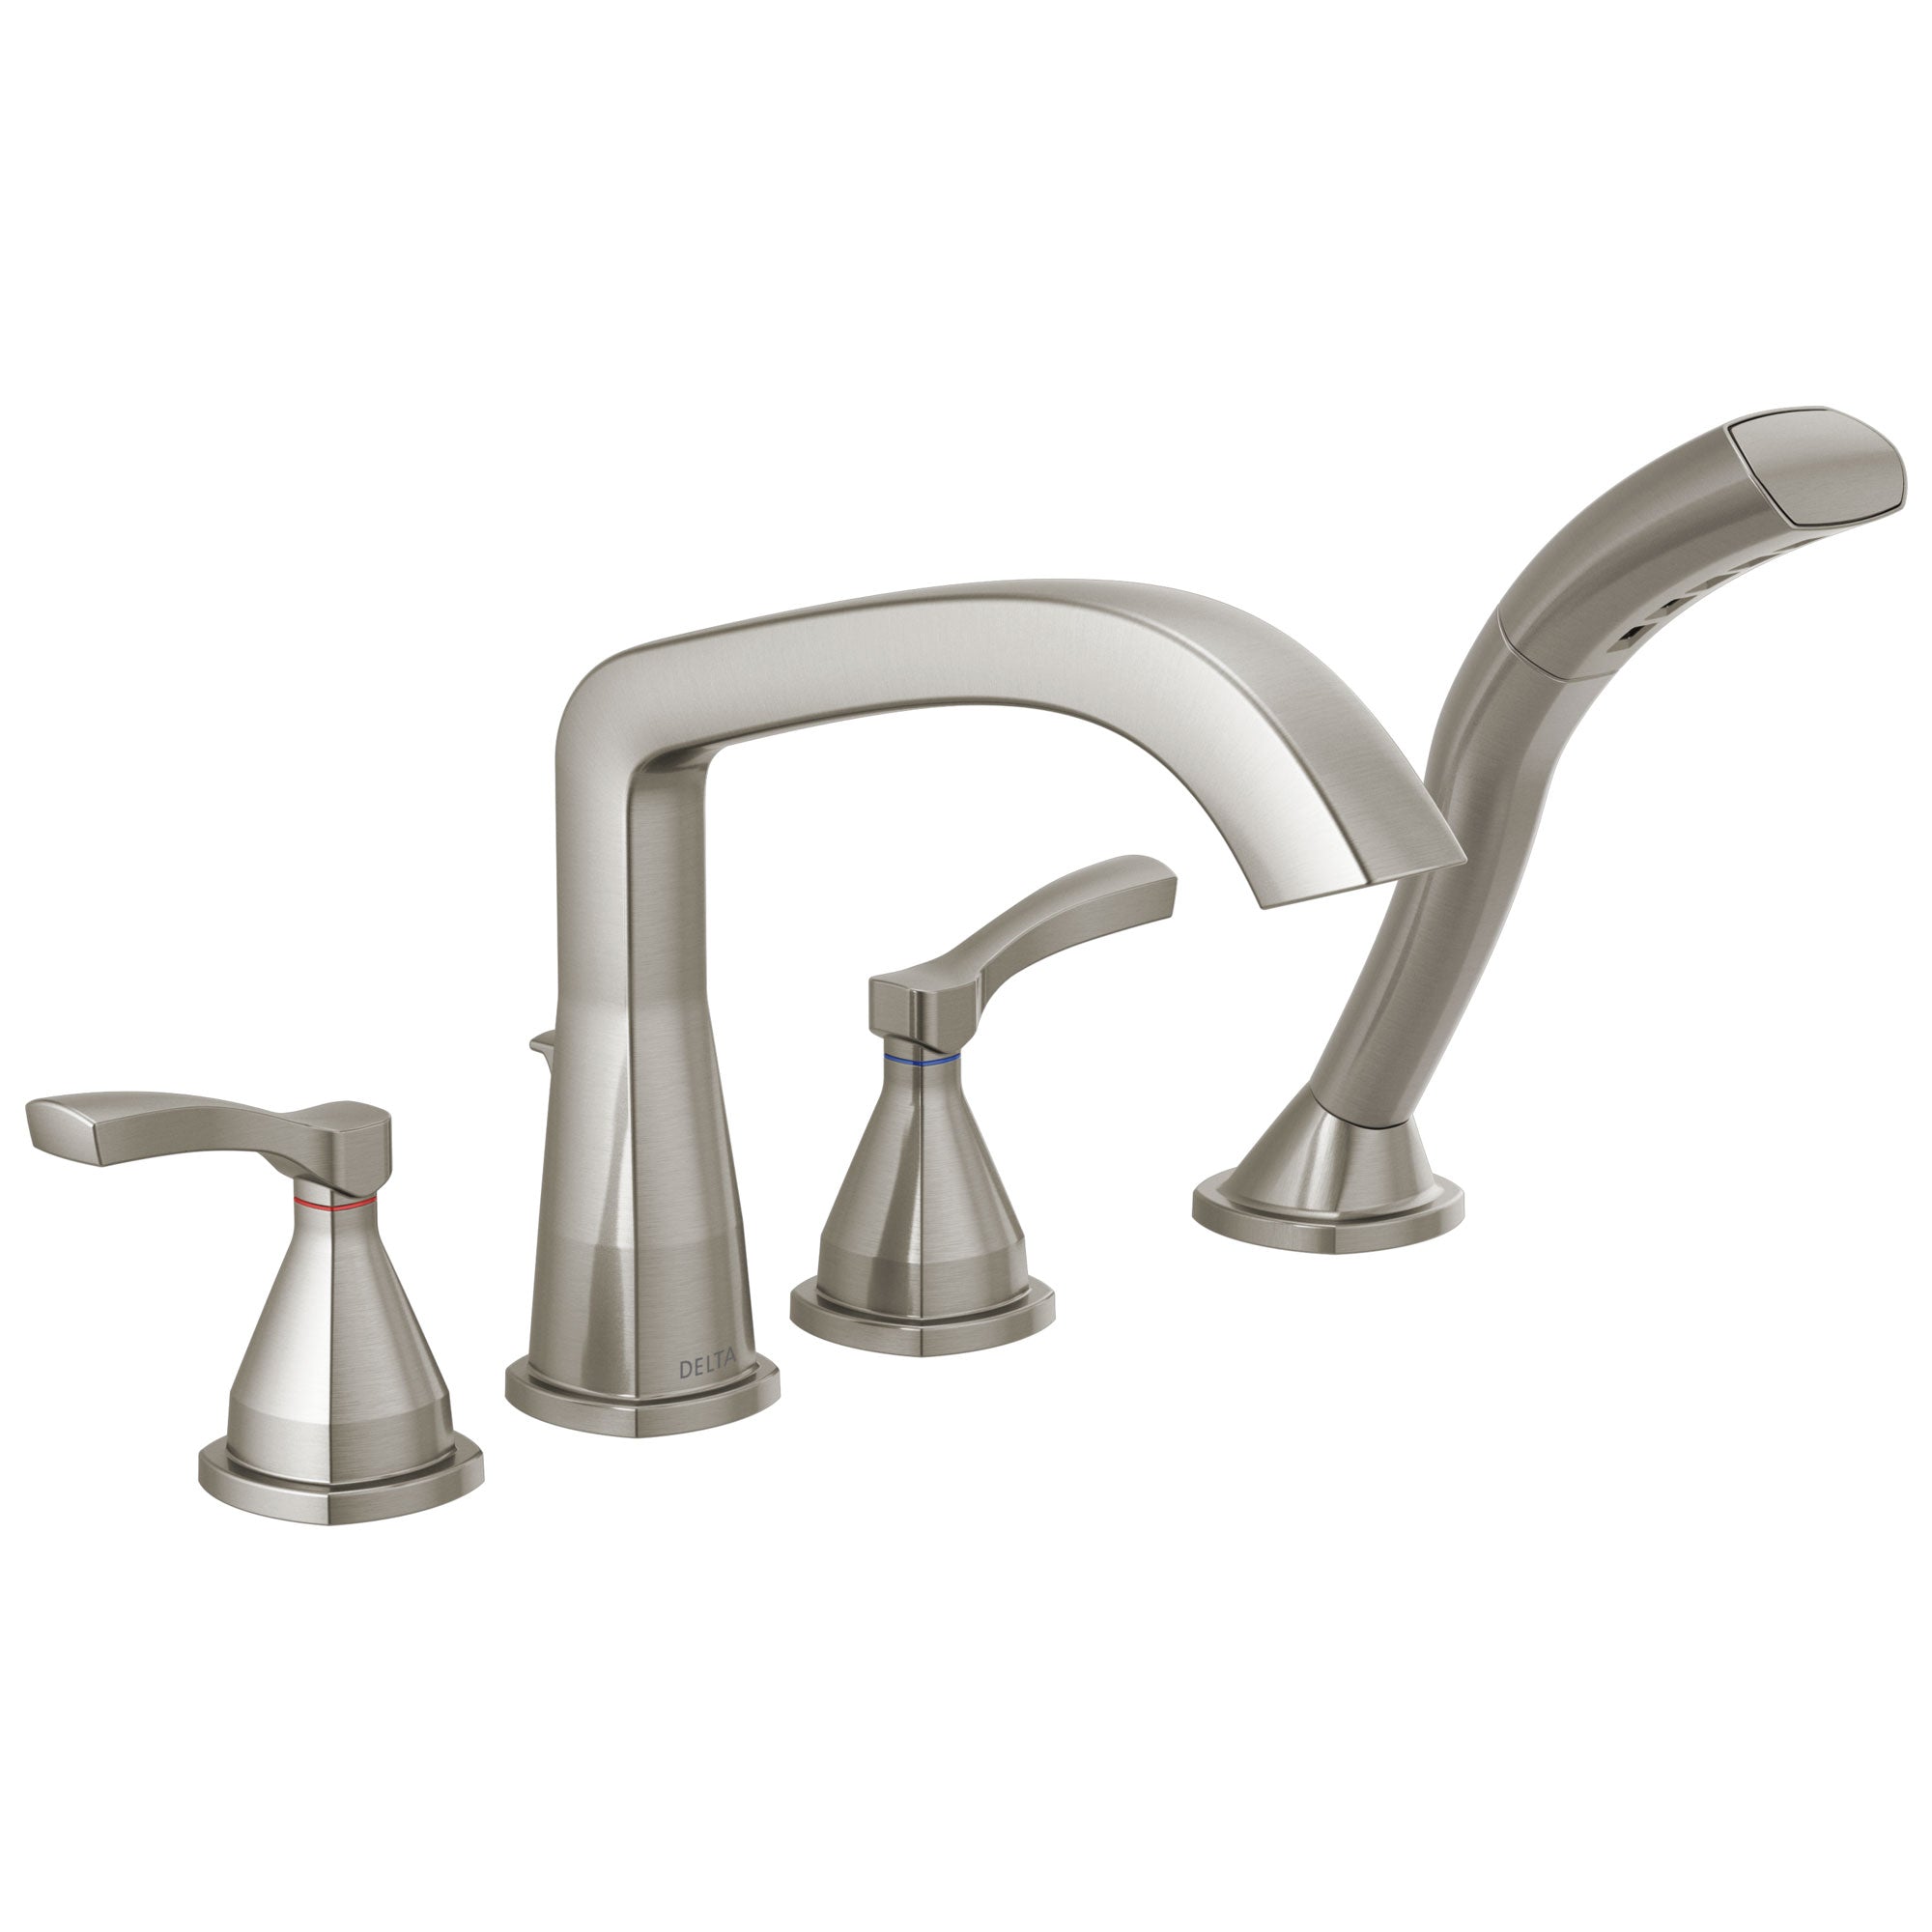 Delta Stryke Stainless Steel Finish Deck Mount Roman Tub Filler Faucet with Hand Shower Includes Rough-in Valve and Lever Handles D3034V